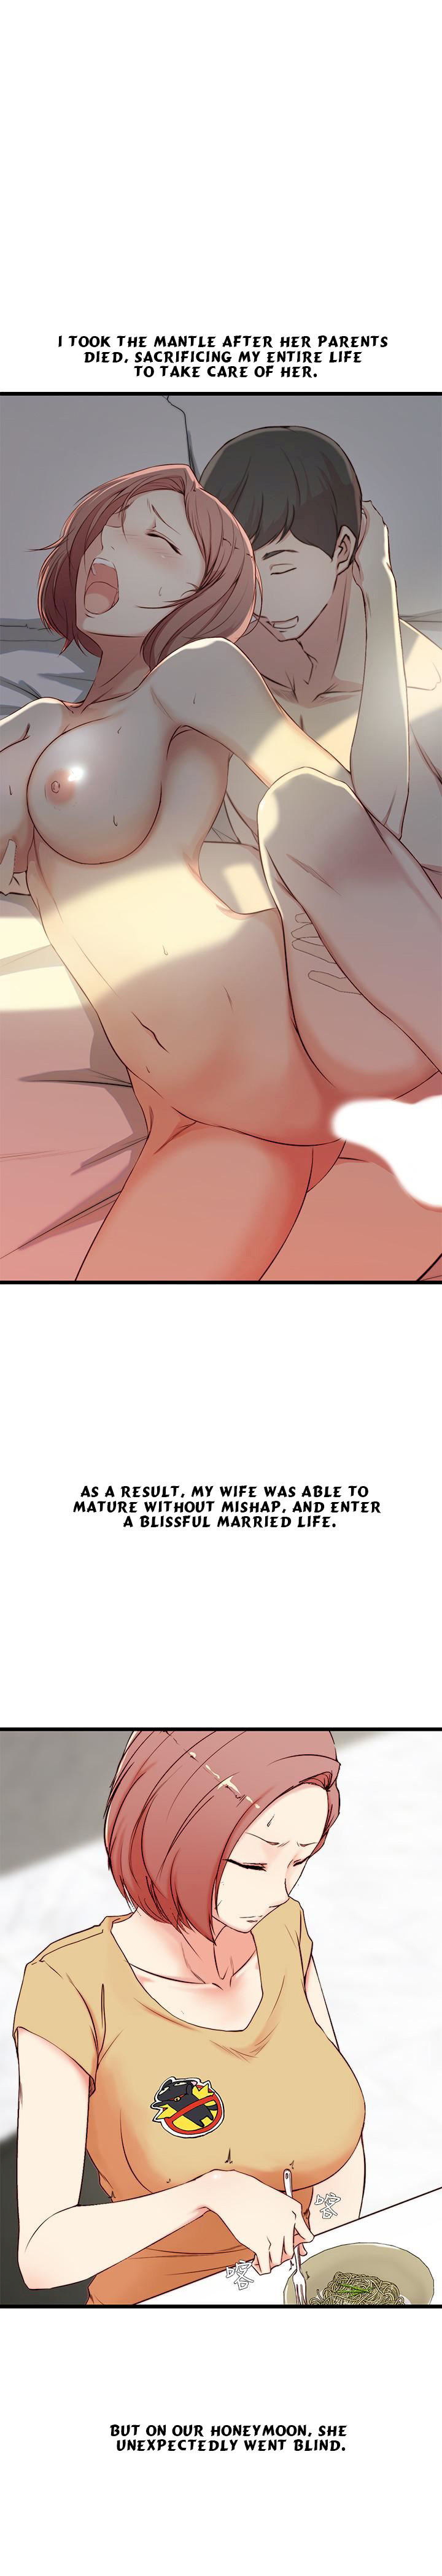 Sister In Law (Kim Jol Gu) - Chapter 1 Page 8